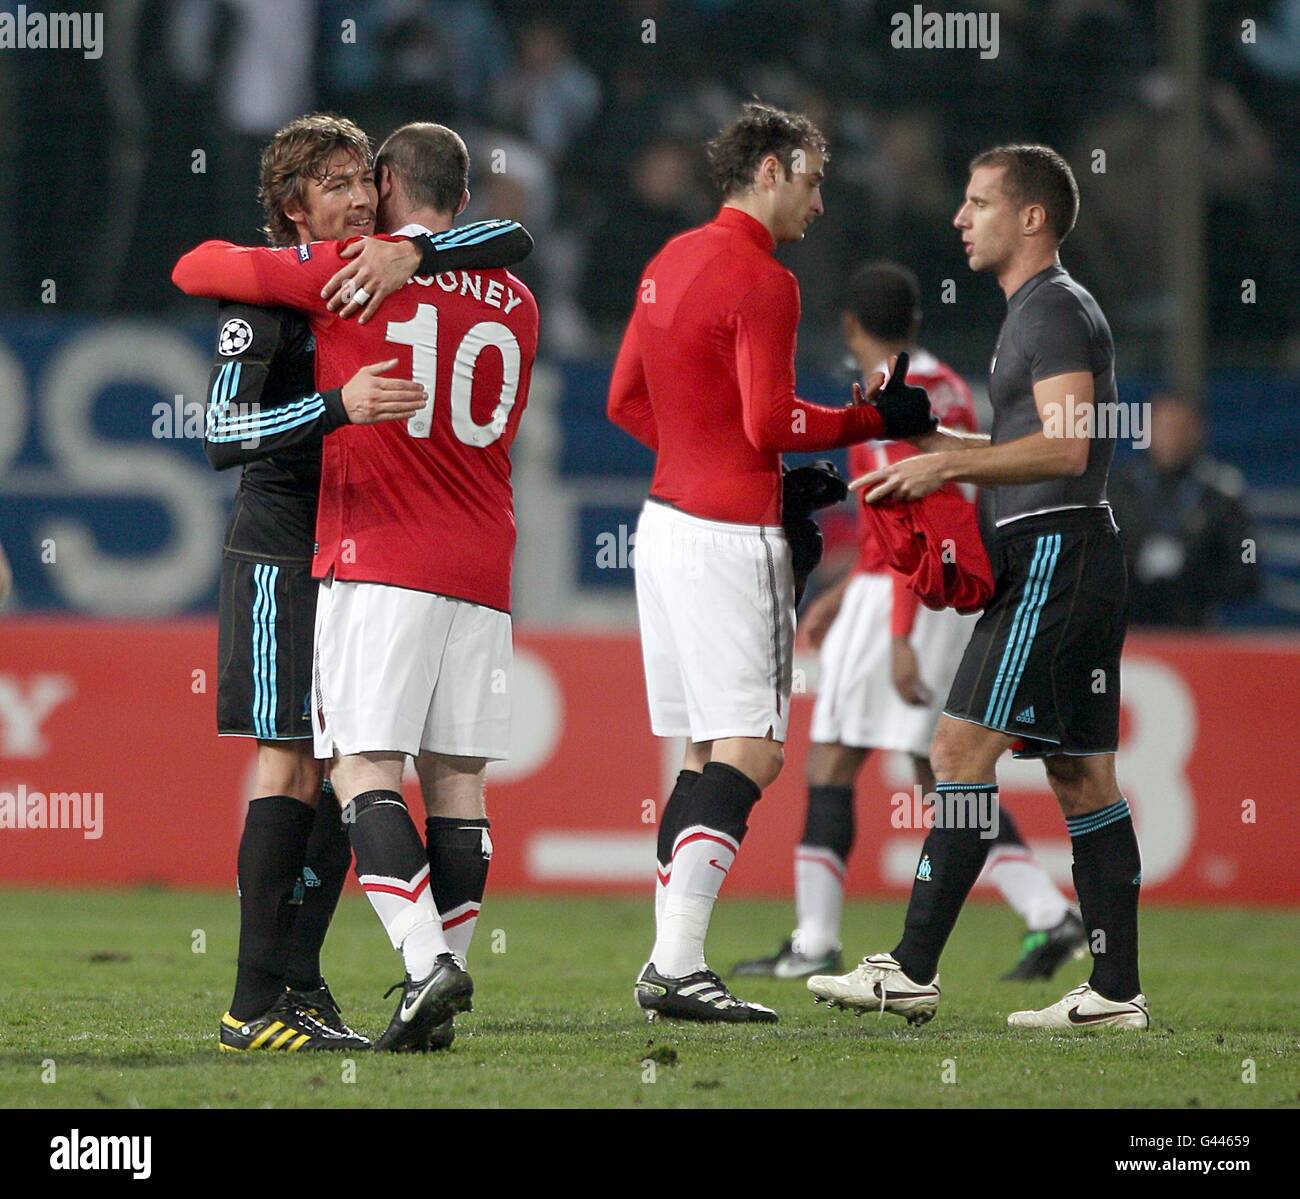 Soccer - UEFA Champions League - Round of 16 - First Leg - Olympique de Marseille v Manchester United - Stade Velodrome. Olympique de Marseille's Gabriel Heinze (left) and Manchester United's Wayne Rooney after the final whistle. Stock Photo